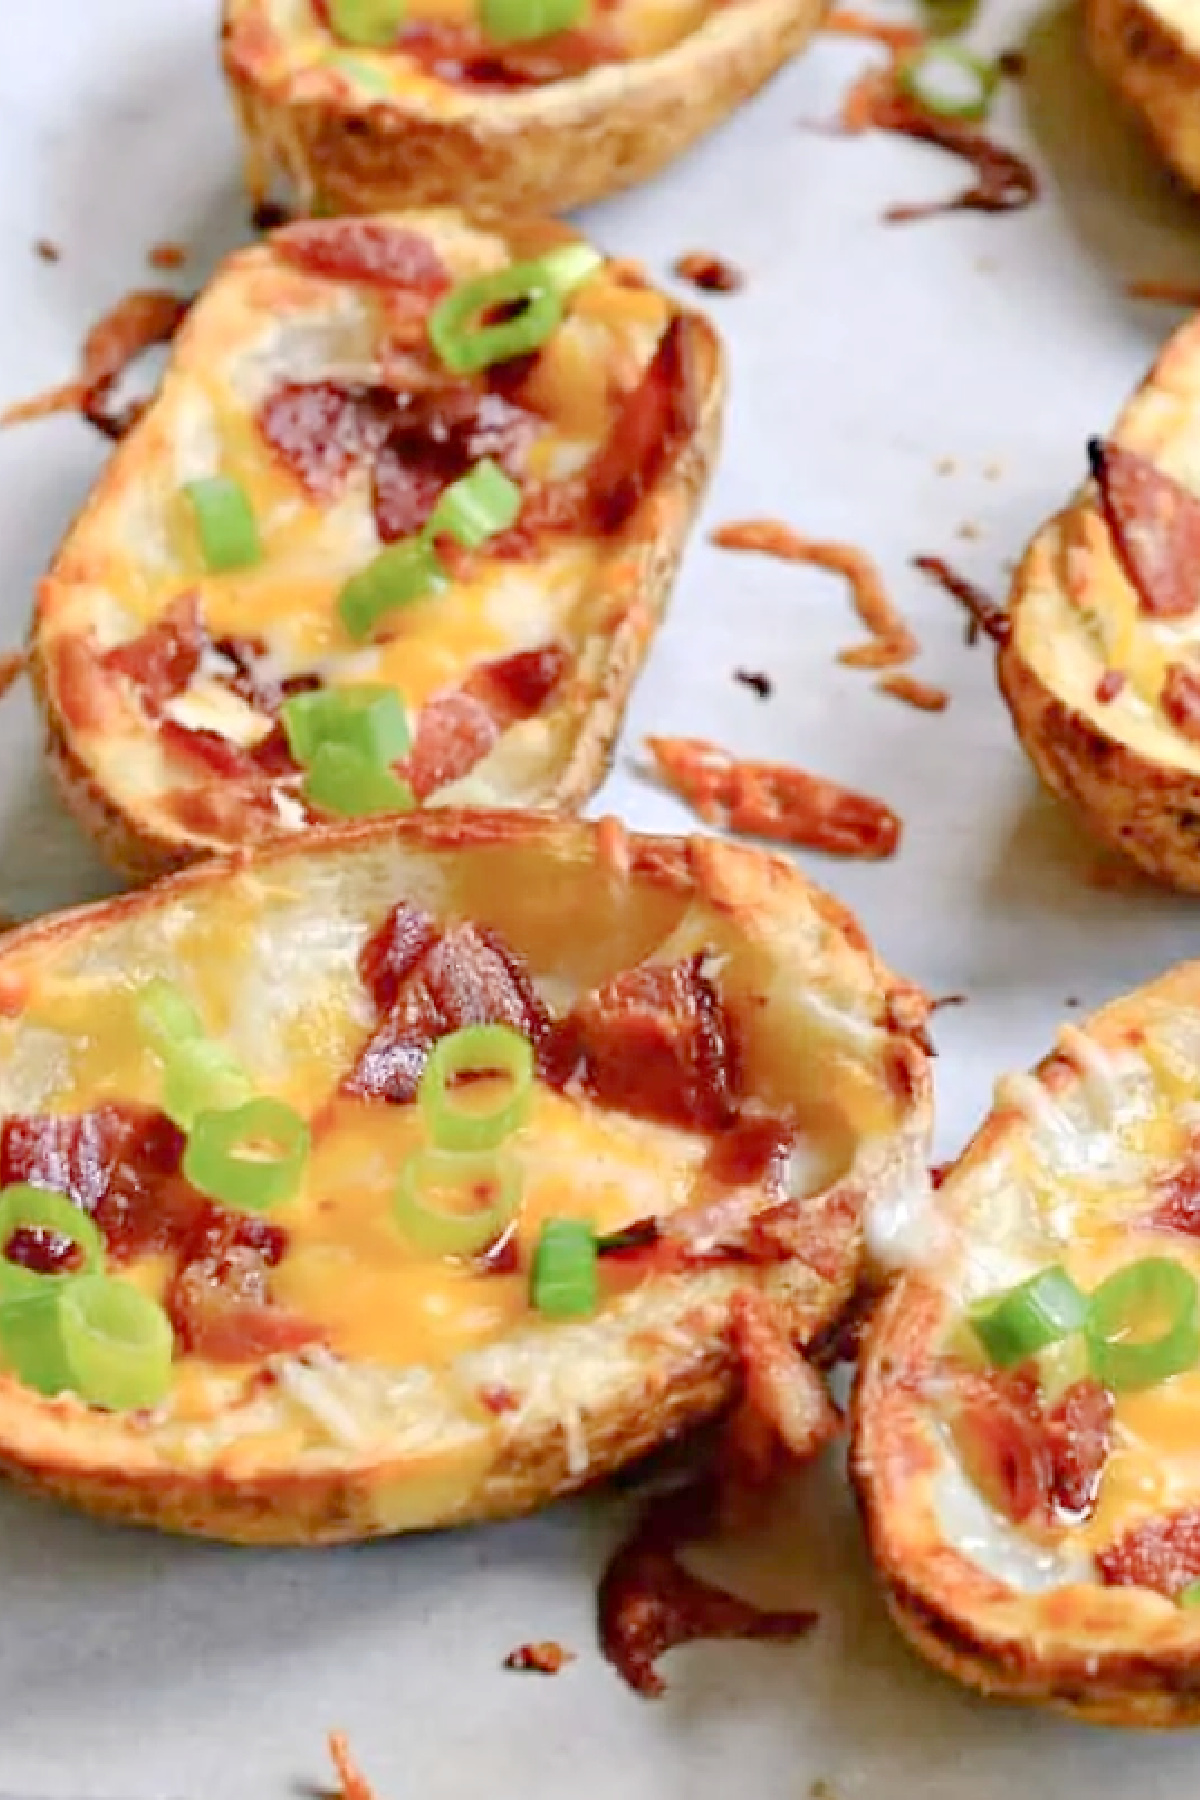 Cheap Party Food Ideas - Potato Skins with Cheese and Bacon Bits